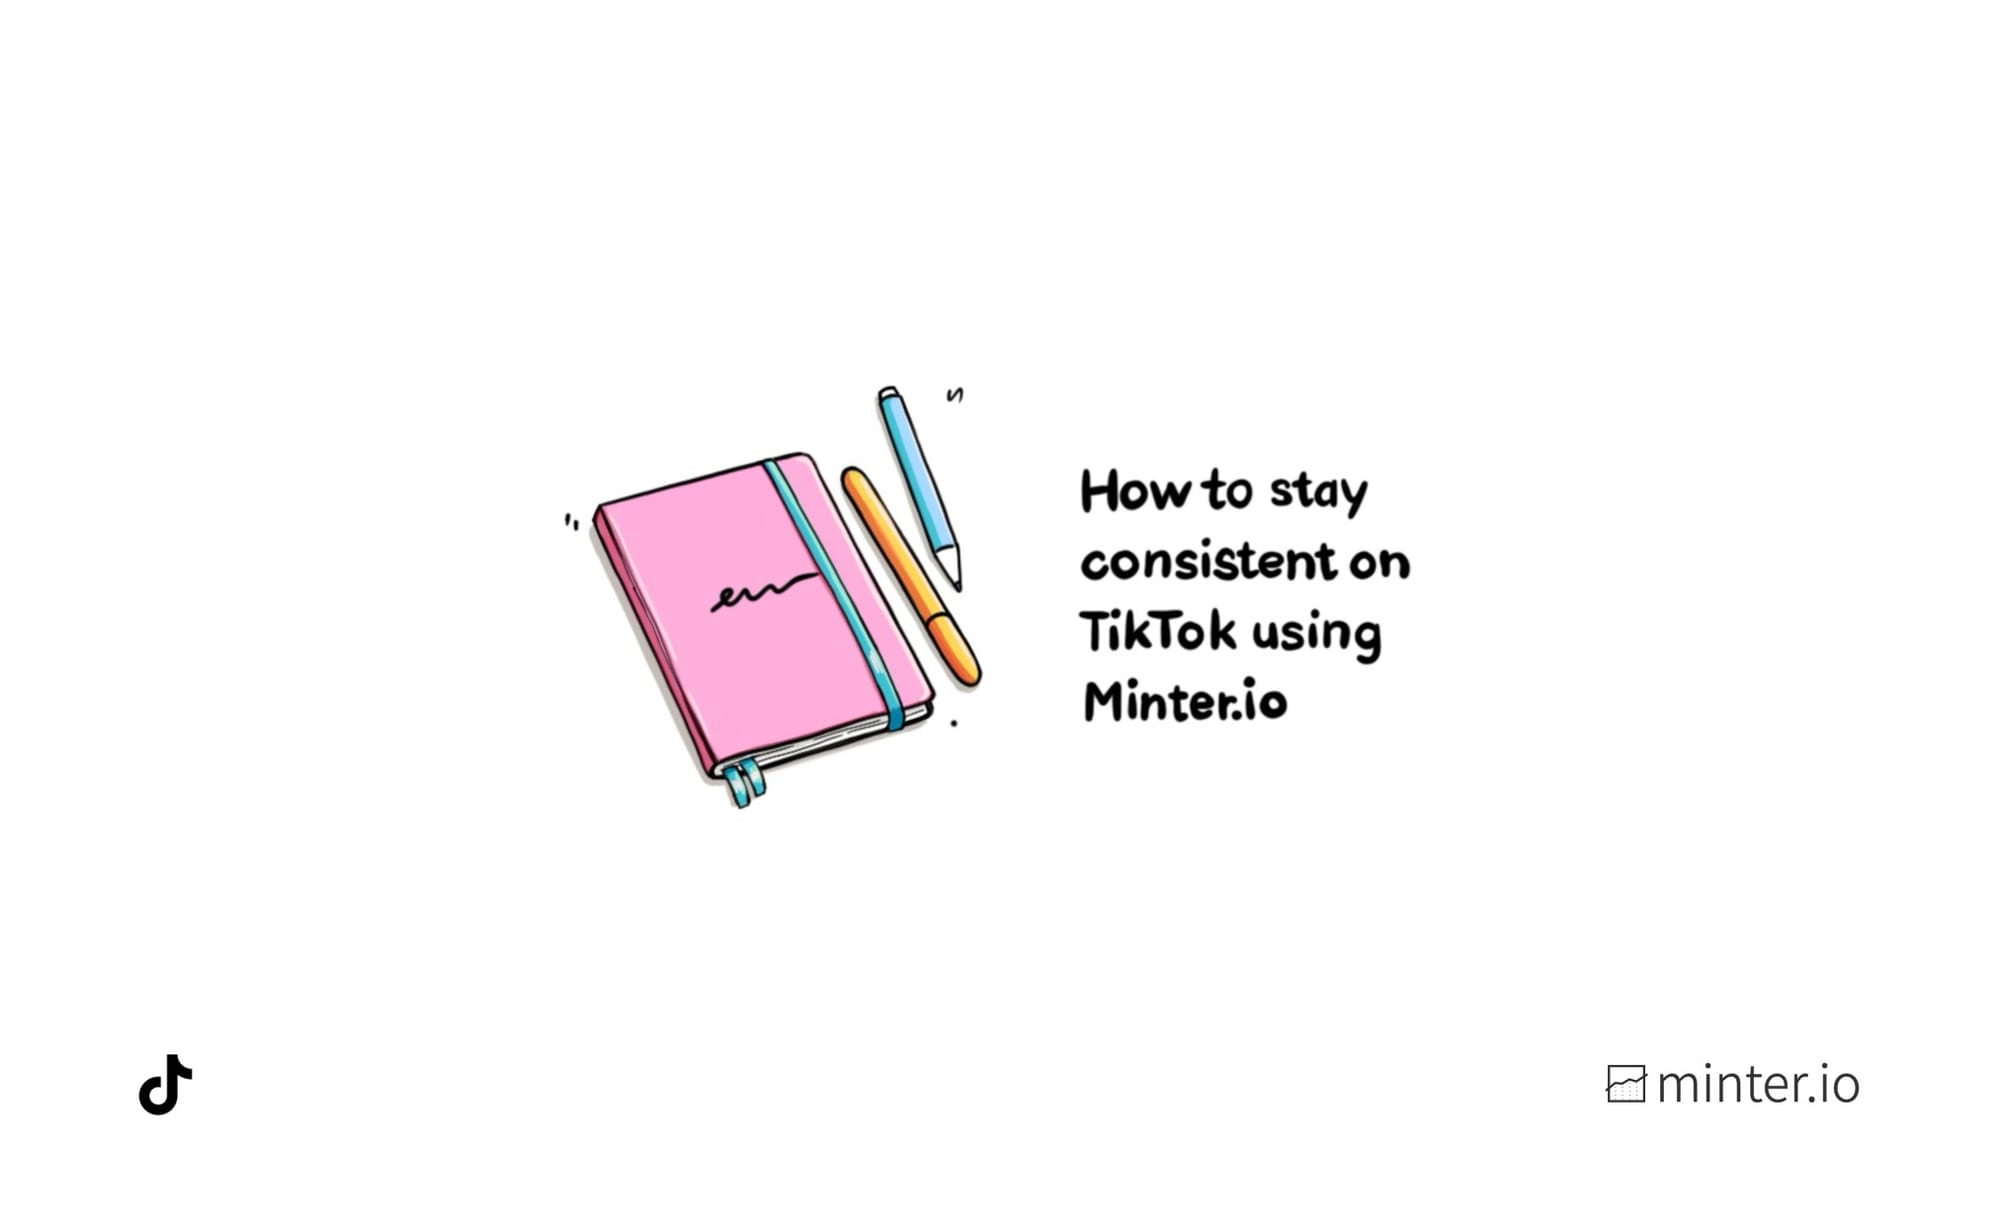 How to stay consistent on TikTok using Minter.io